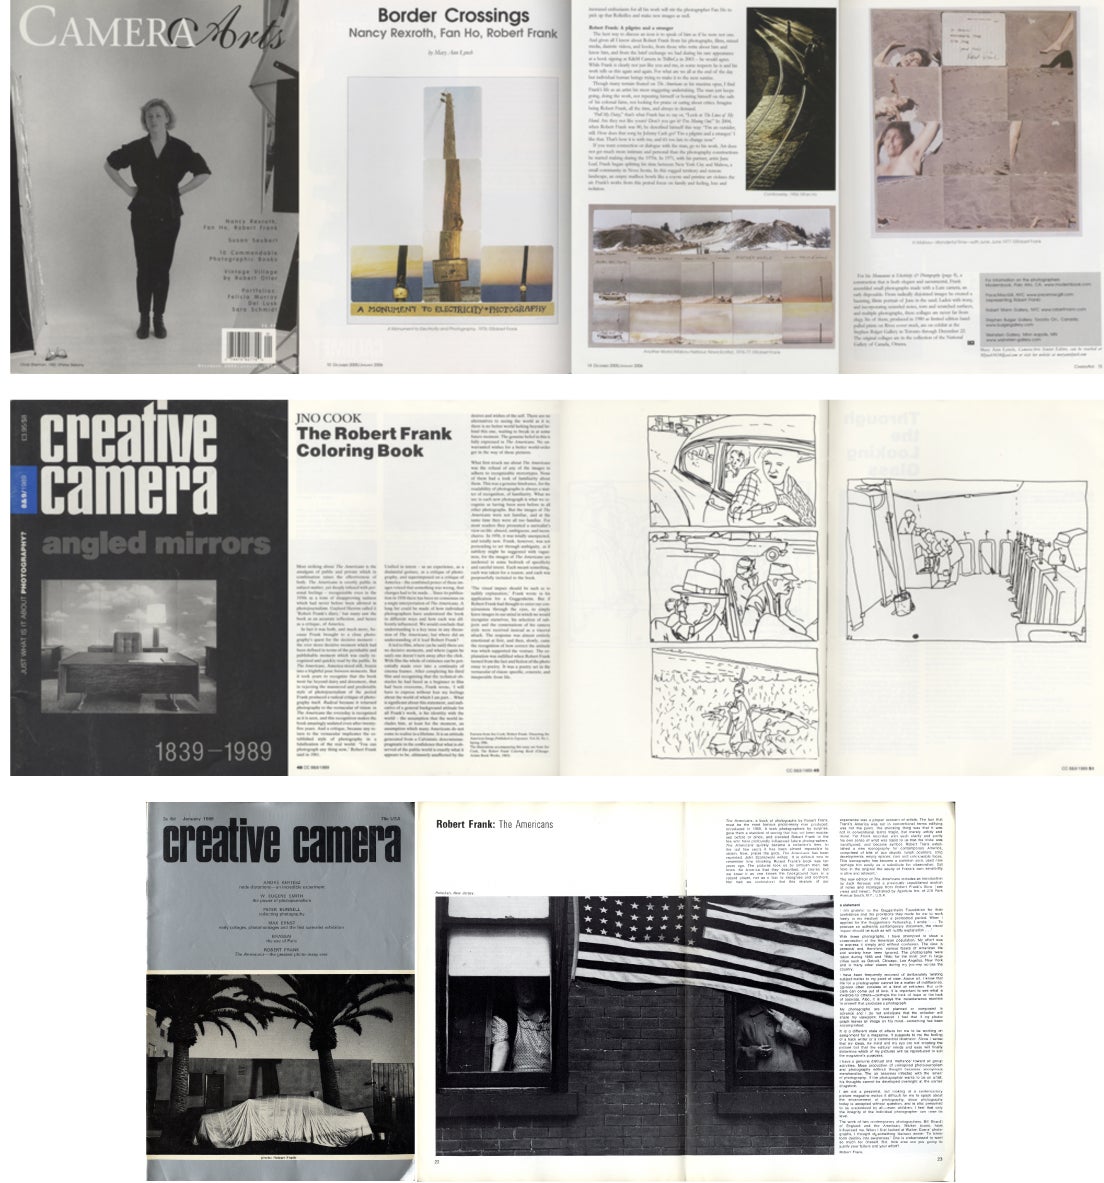 Robert Frank: A Complete Collection of Books and Limited Editions, Including All 15 Editions of "The Americans" from 1958 to 2008 [9 Volumes SIGNED (3 INSCRIBED)] and a Sweeping Archive of Printed Ephemera from Seven Decades